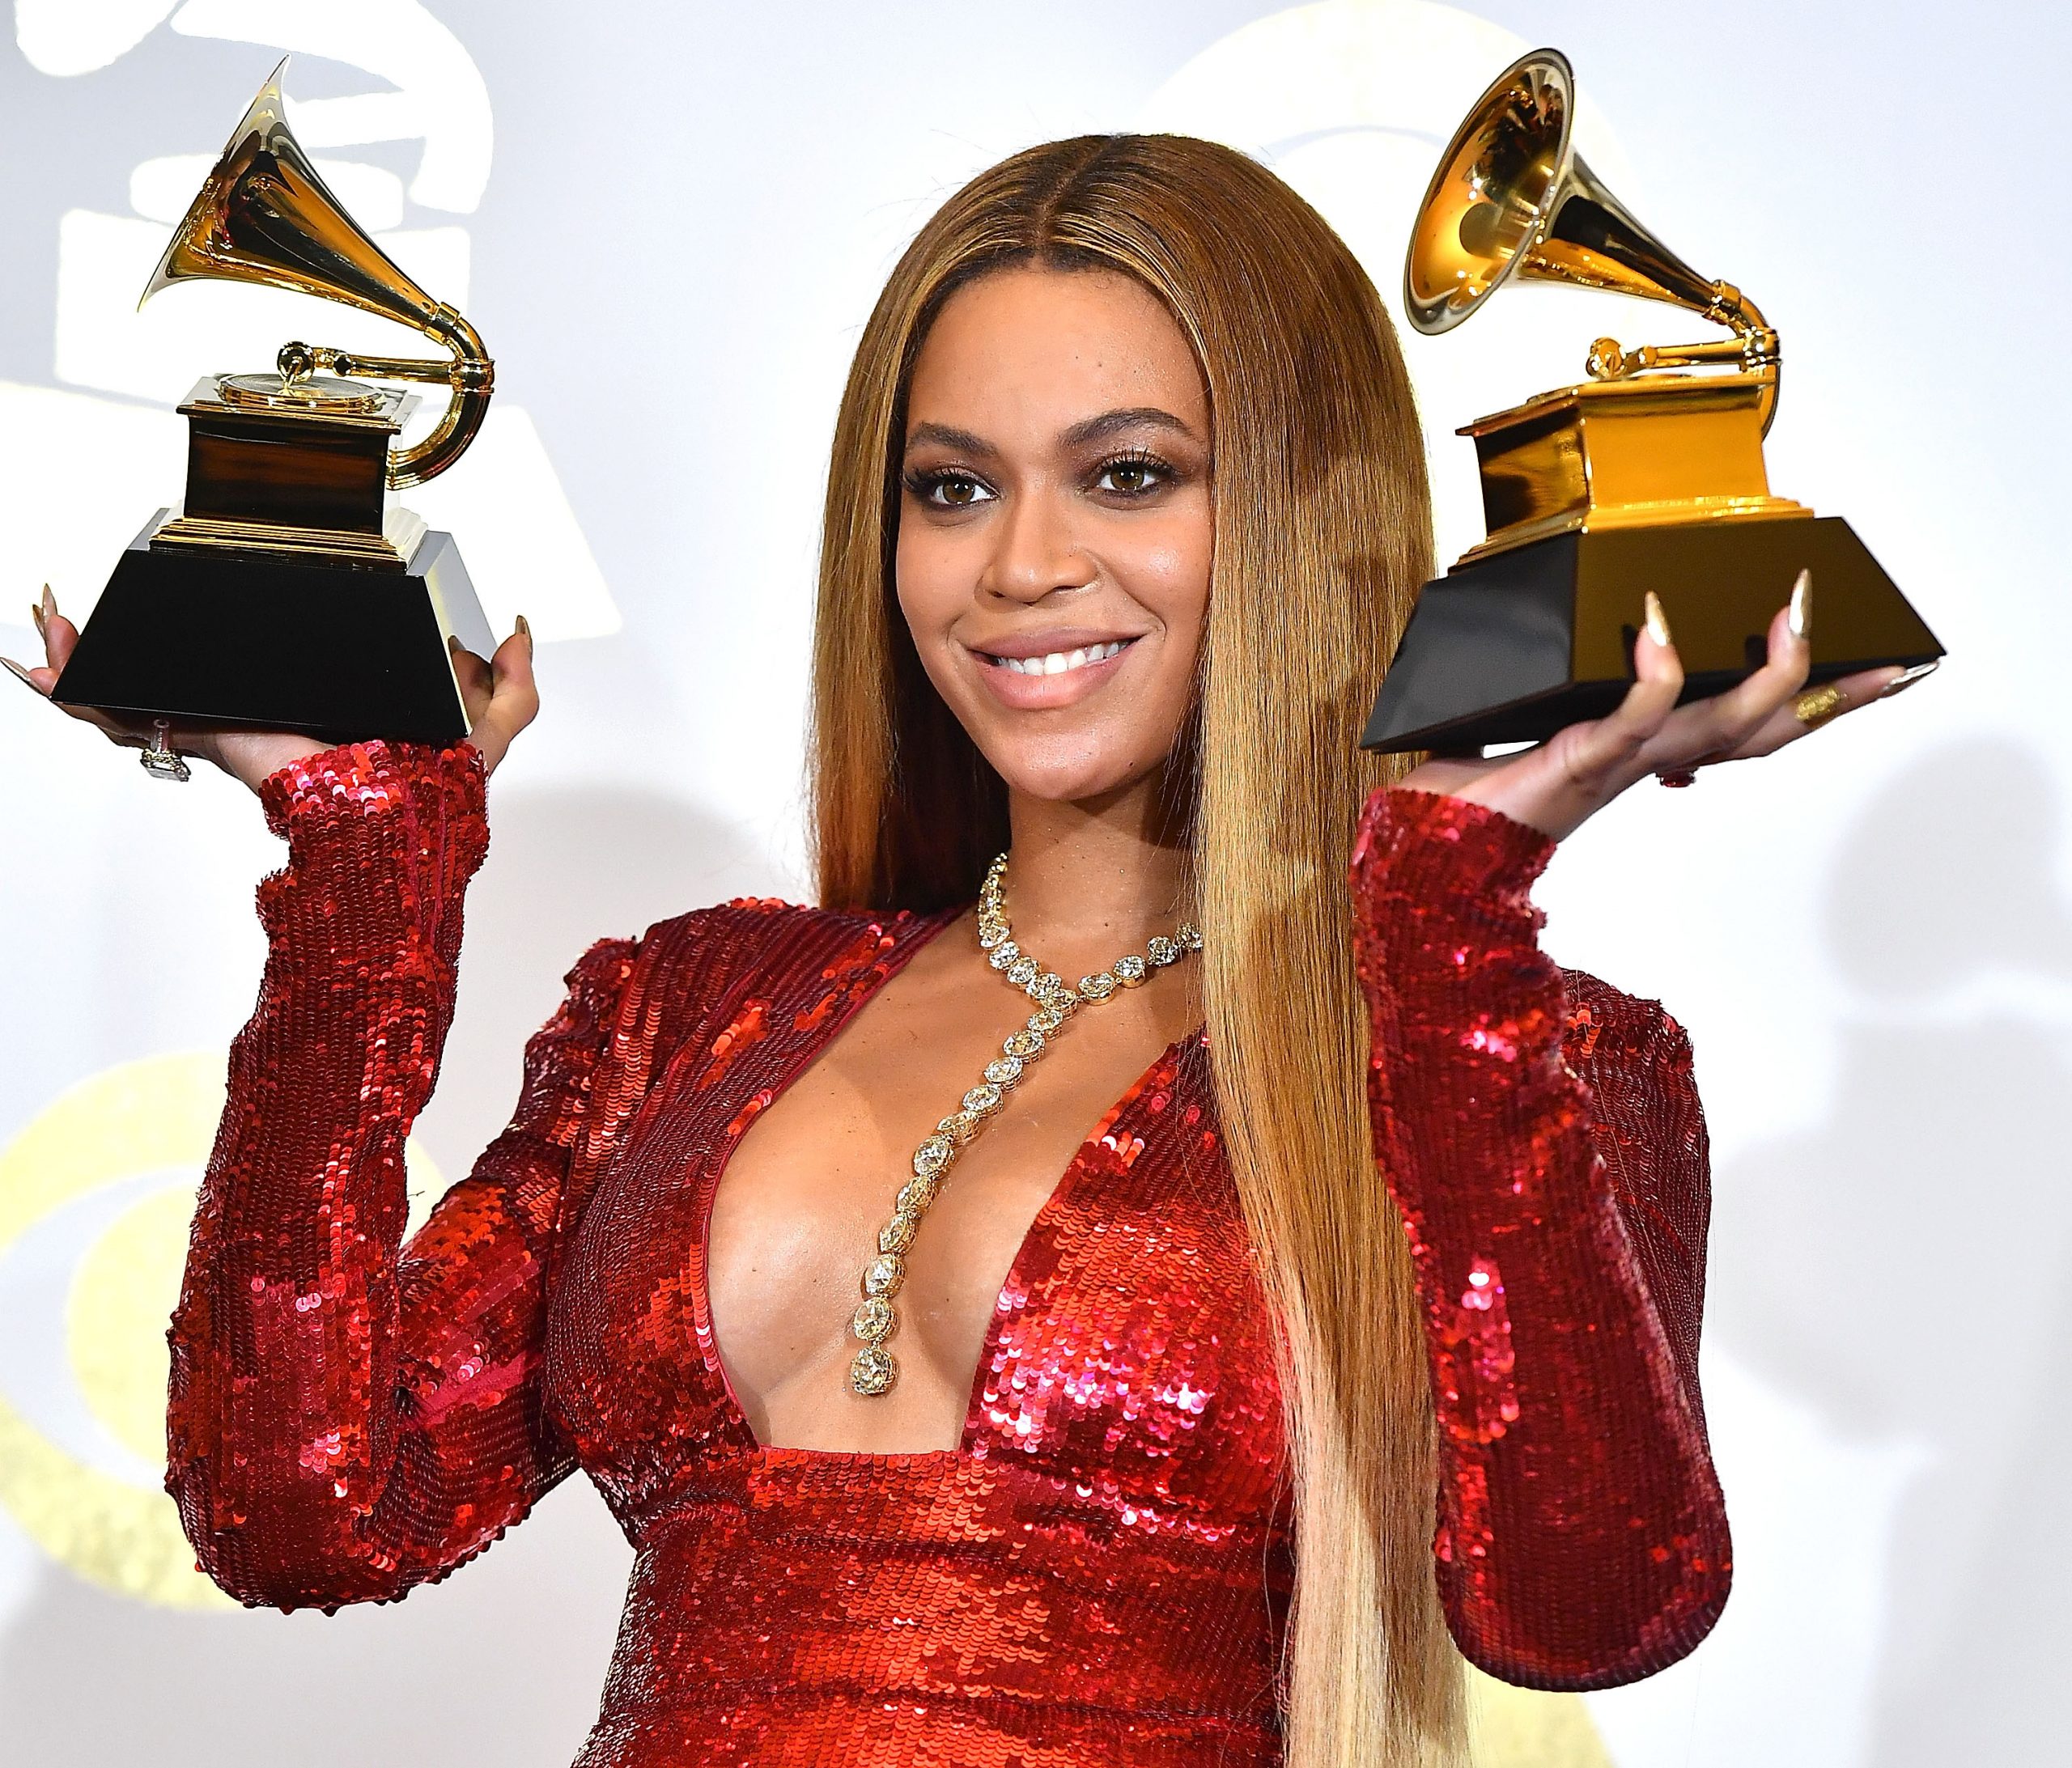 Beyoncé, wearing a red dress and holding Grammy Awards, has looked up to Michael Jackson for years